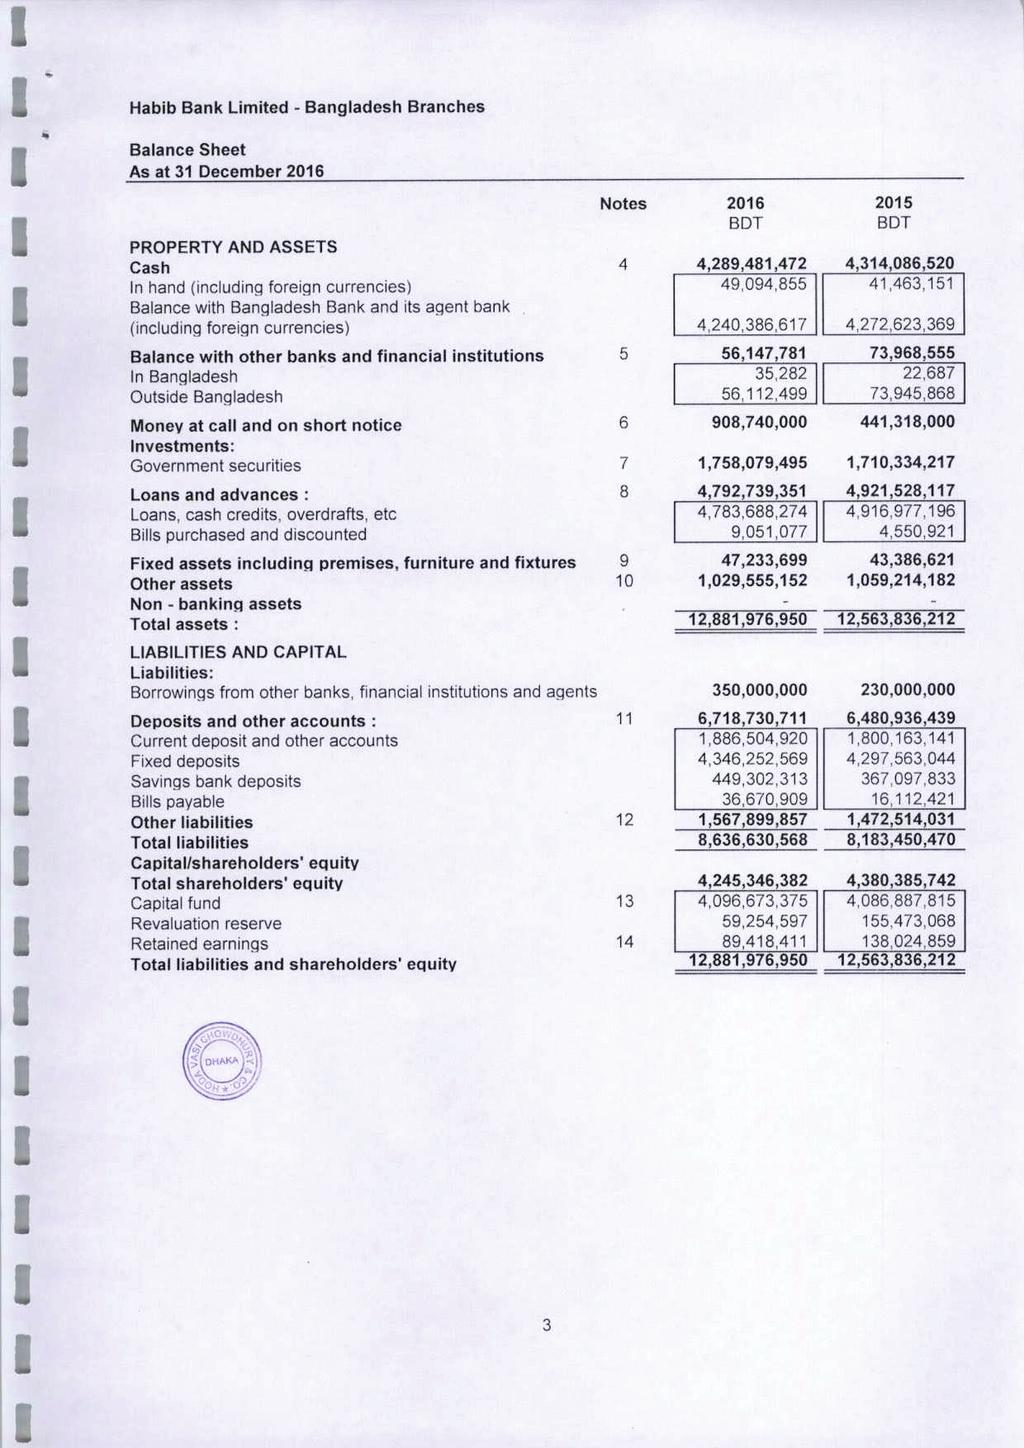 Hablb Bank Limited - Bangladesh Branches Balance Sheet As at 31 December 2016 PROPERTY AND ASSETS Cash In hand (including foreign currencies) Balance with Bangladesh Bank and its agent bank